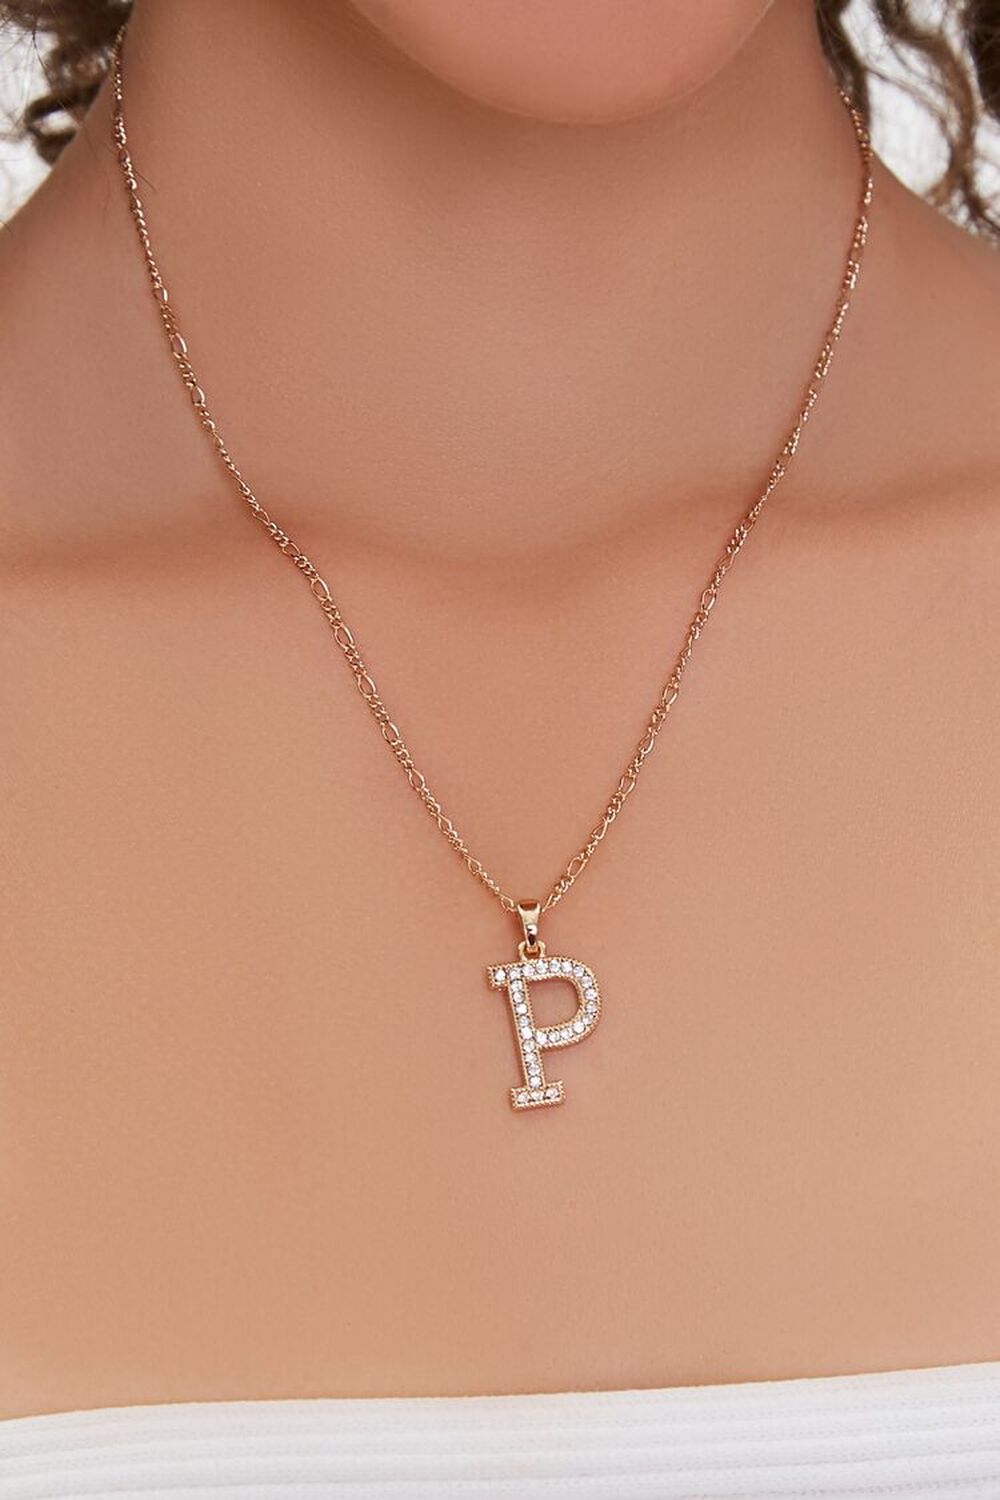 GOLD/P Initial Pendant Necklace, image 1